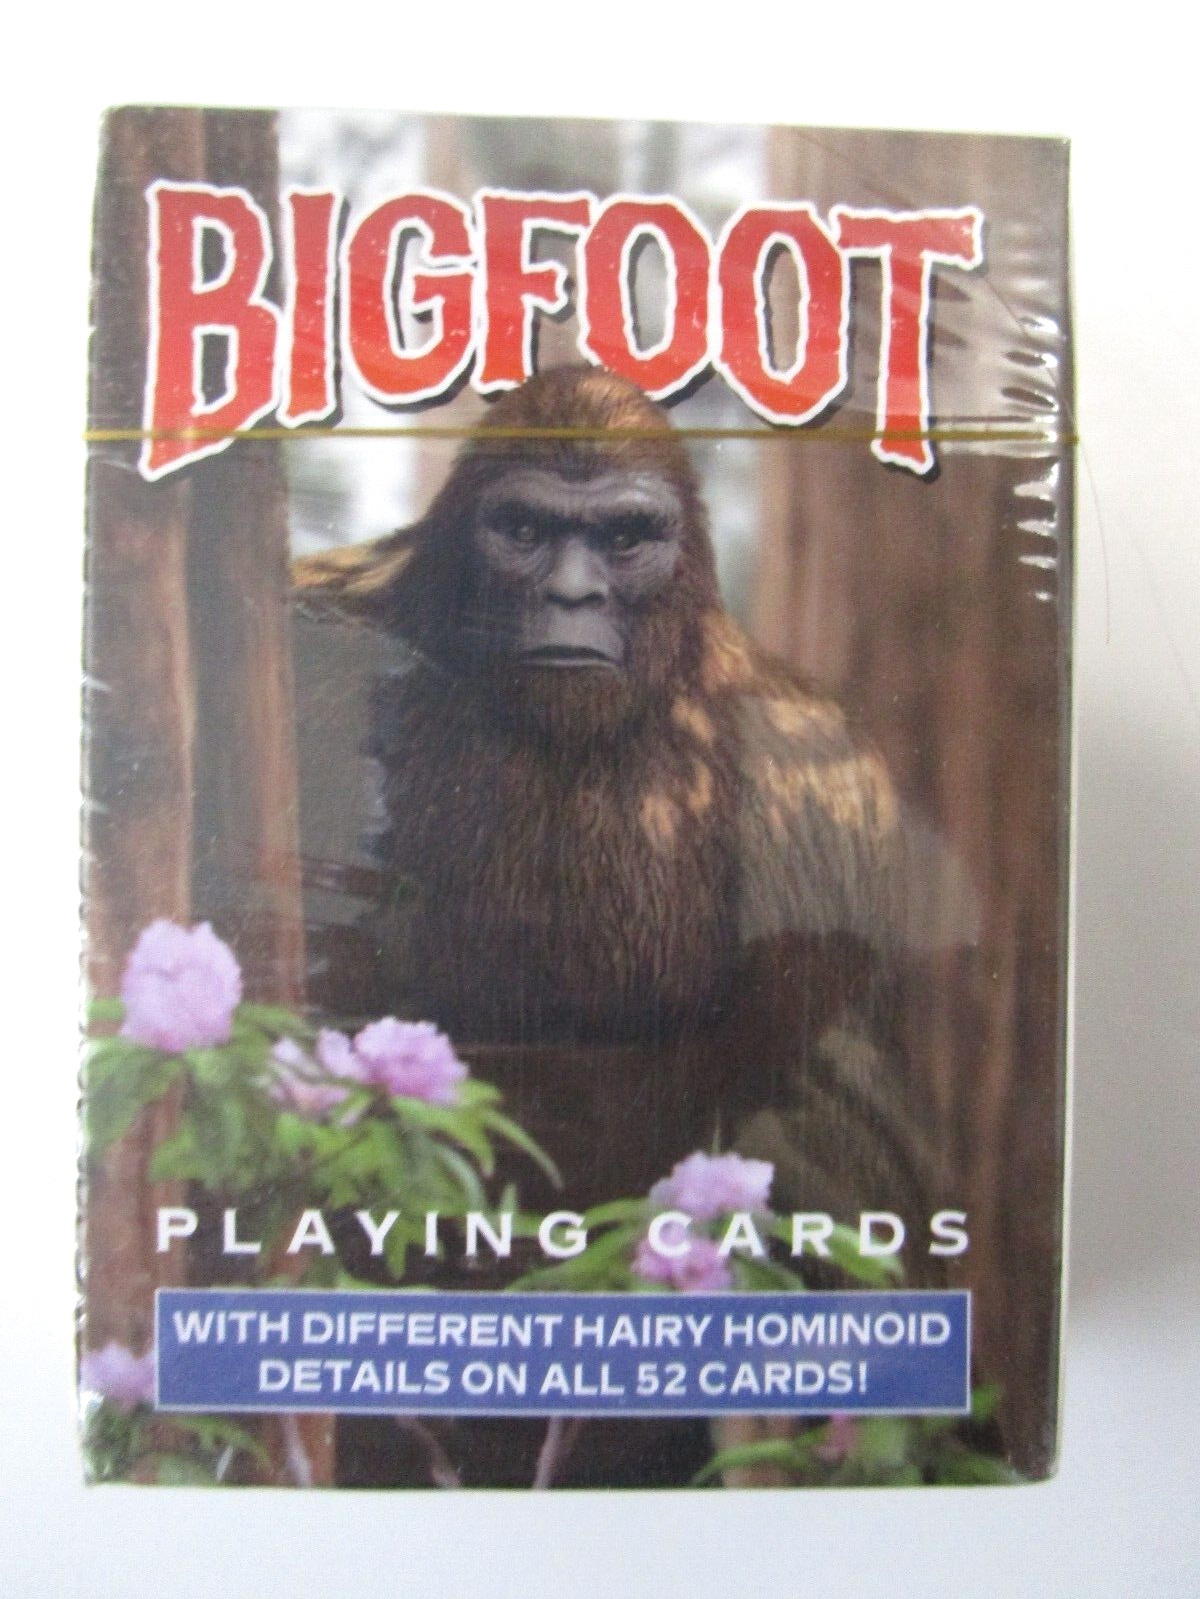 Paradise Cay Bigfoot Playing Cards - Standard 52 Card Deck New Sealed